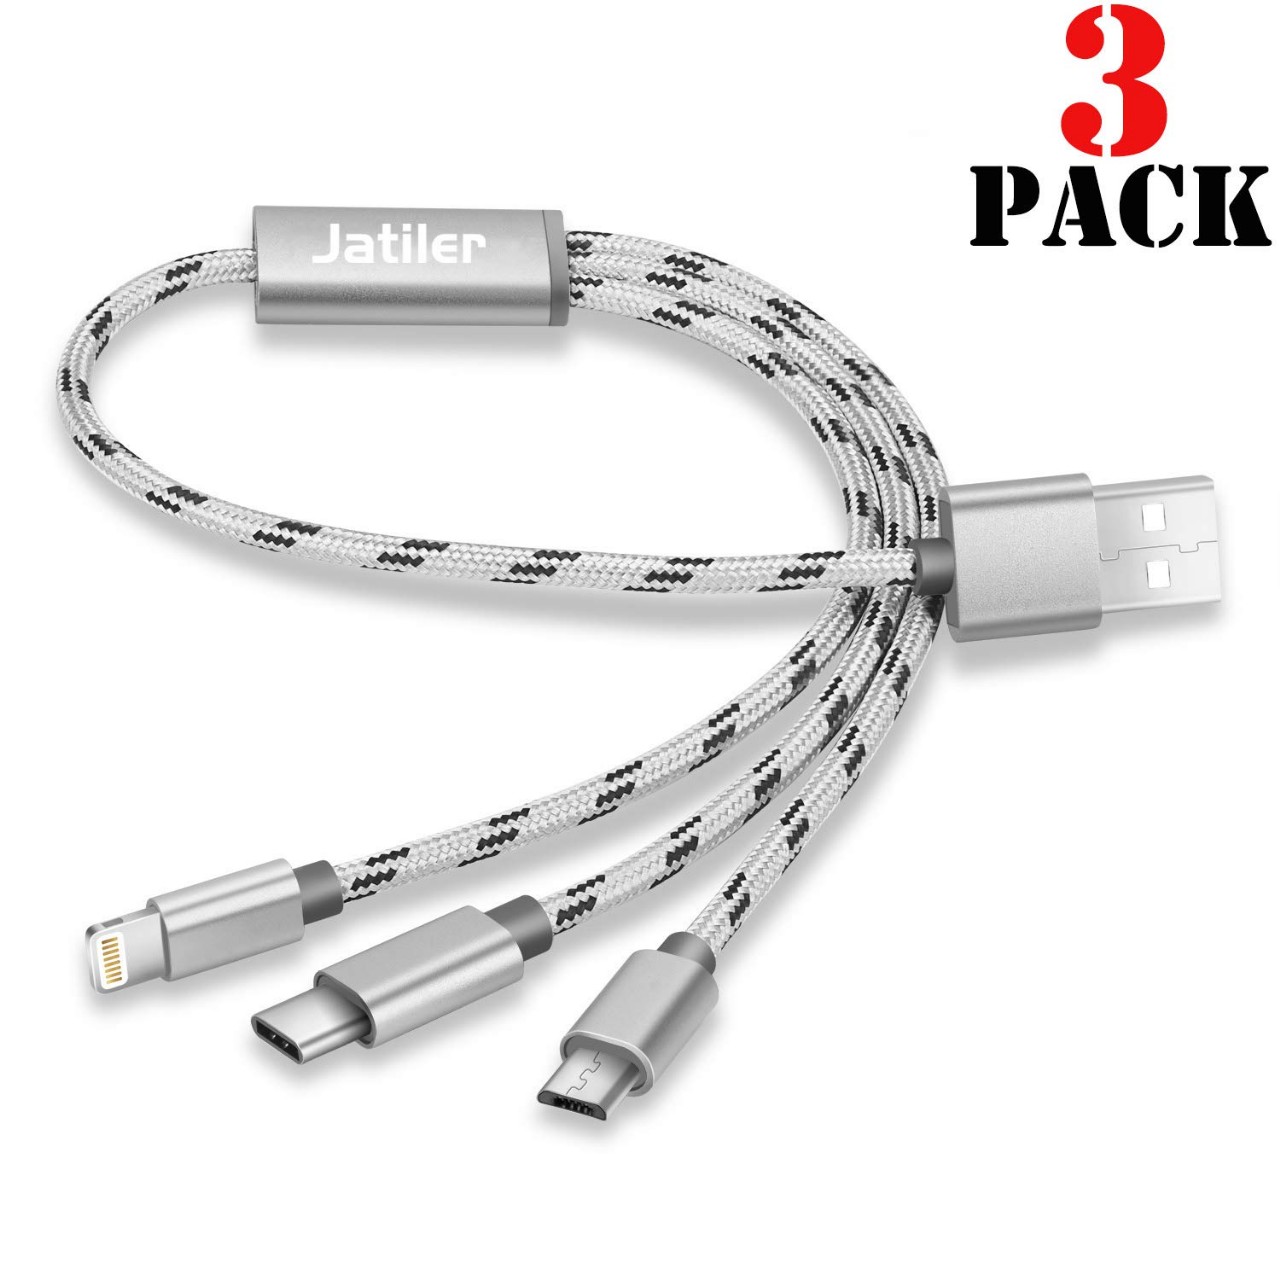 3Pack Multi USB Cable, 1ft Multi Charger Cable Premium Short Multi Charging Cable Nylon Braided 3 in